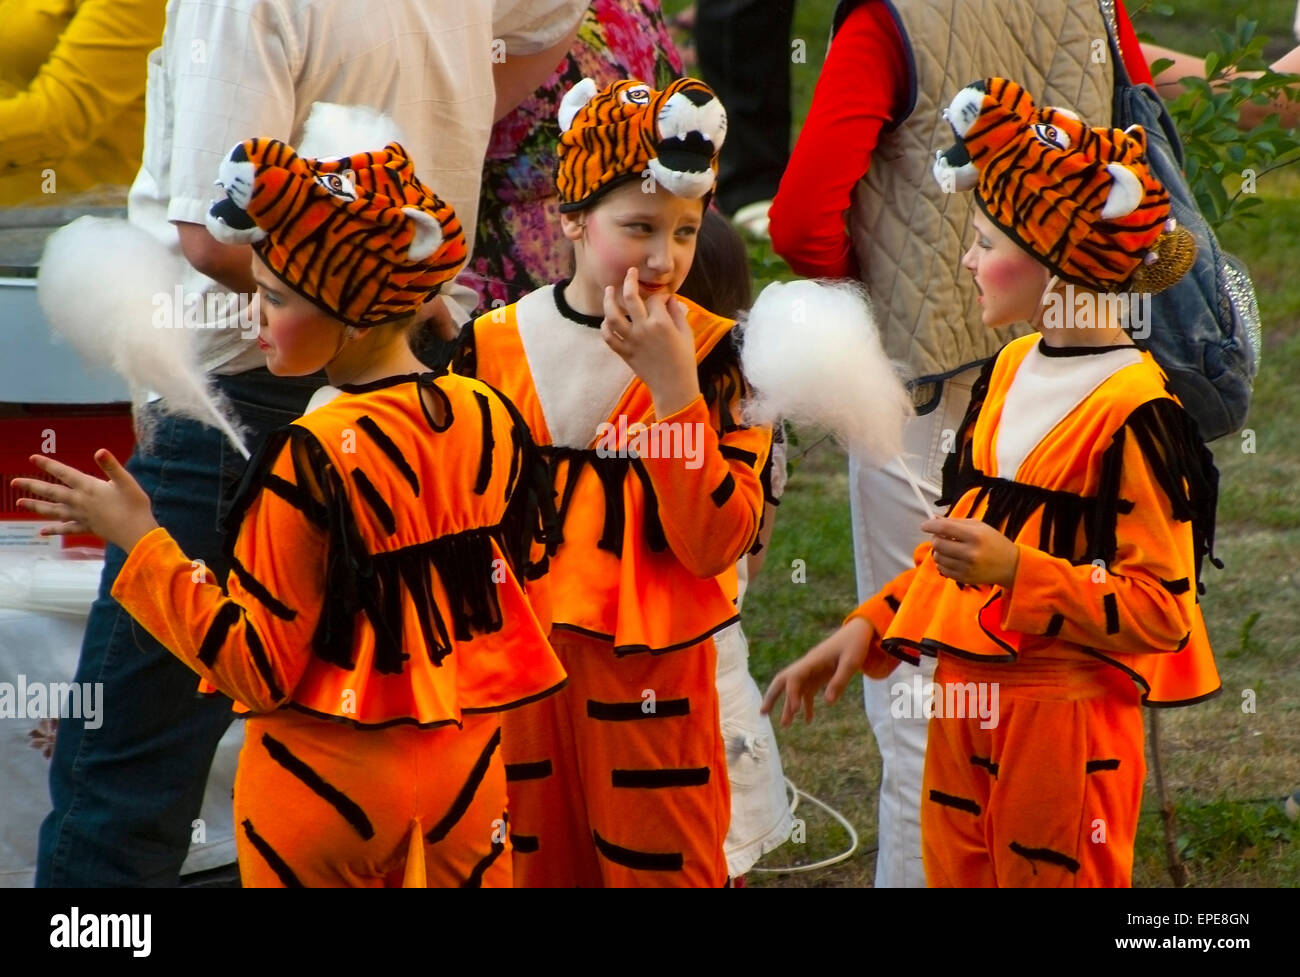 Girls in costumes tigers at the festival. Stock Photo